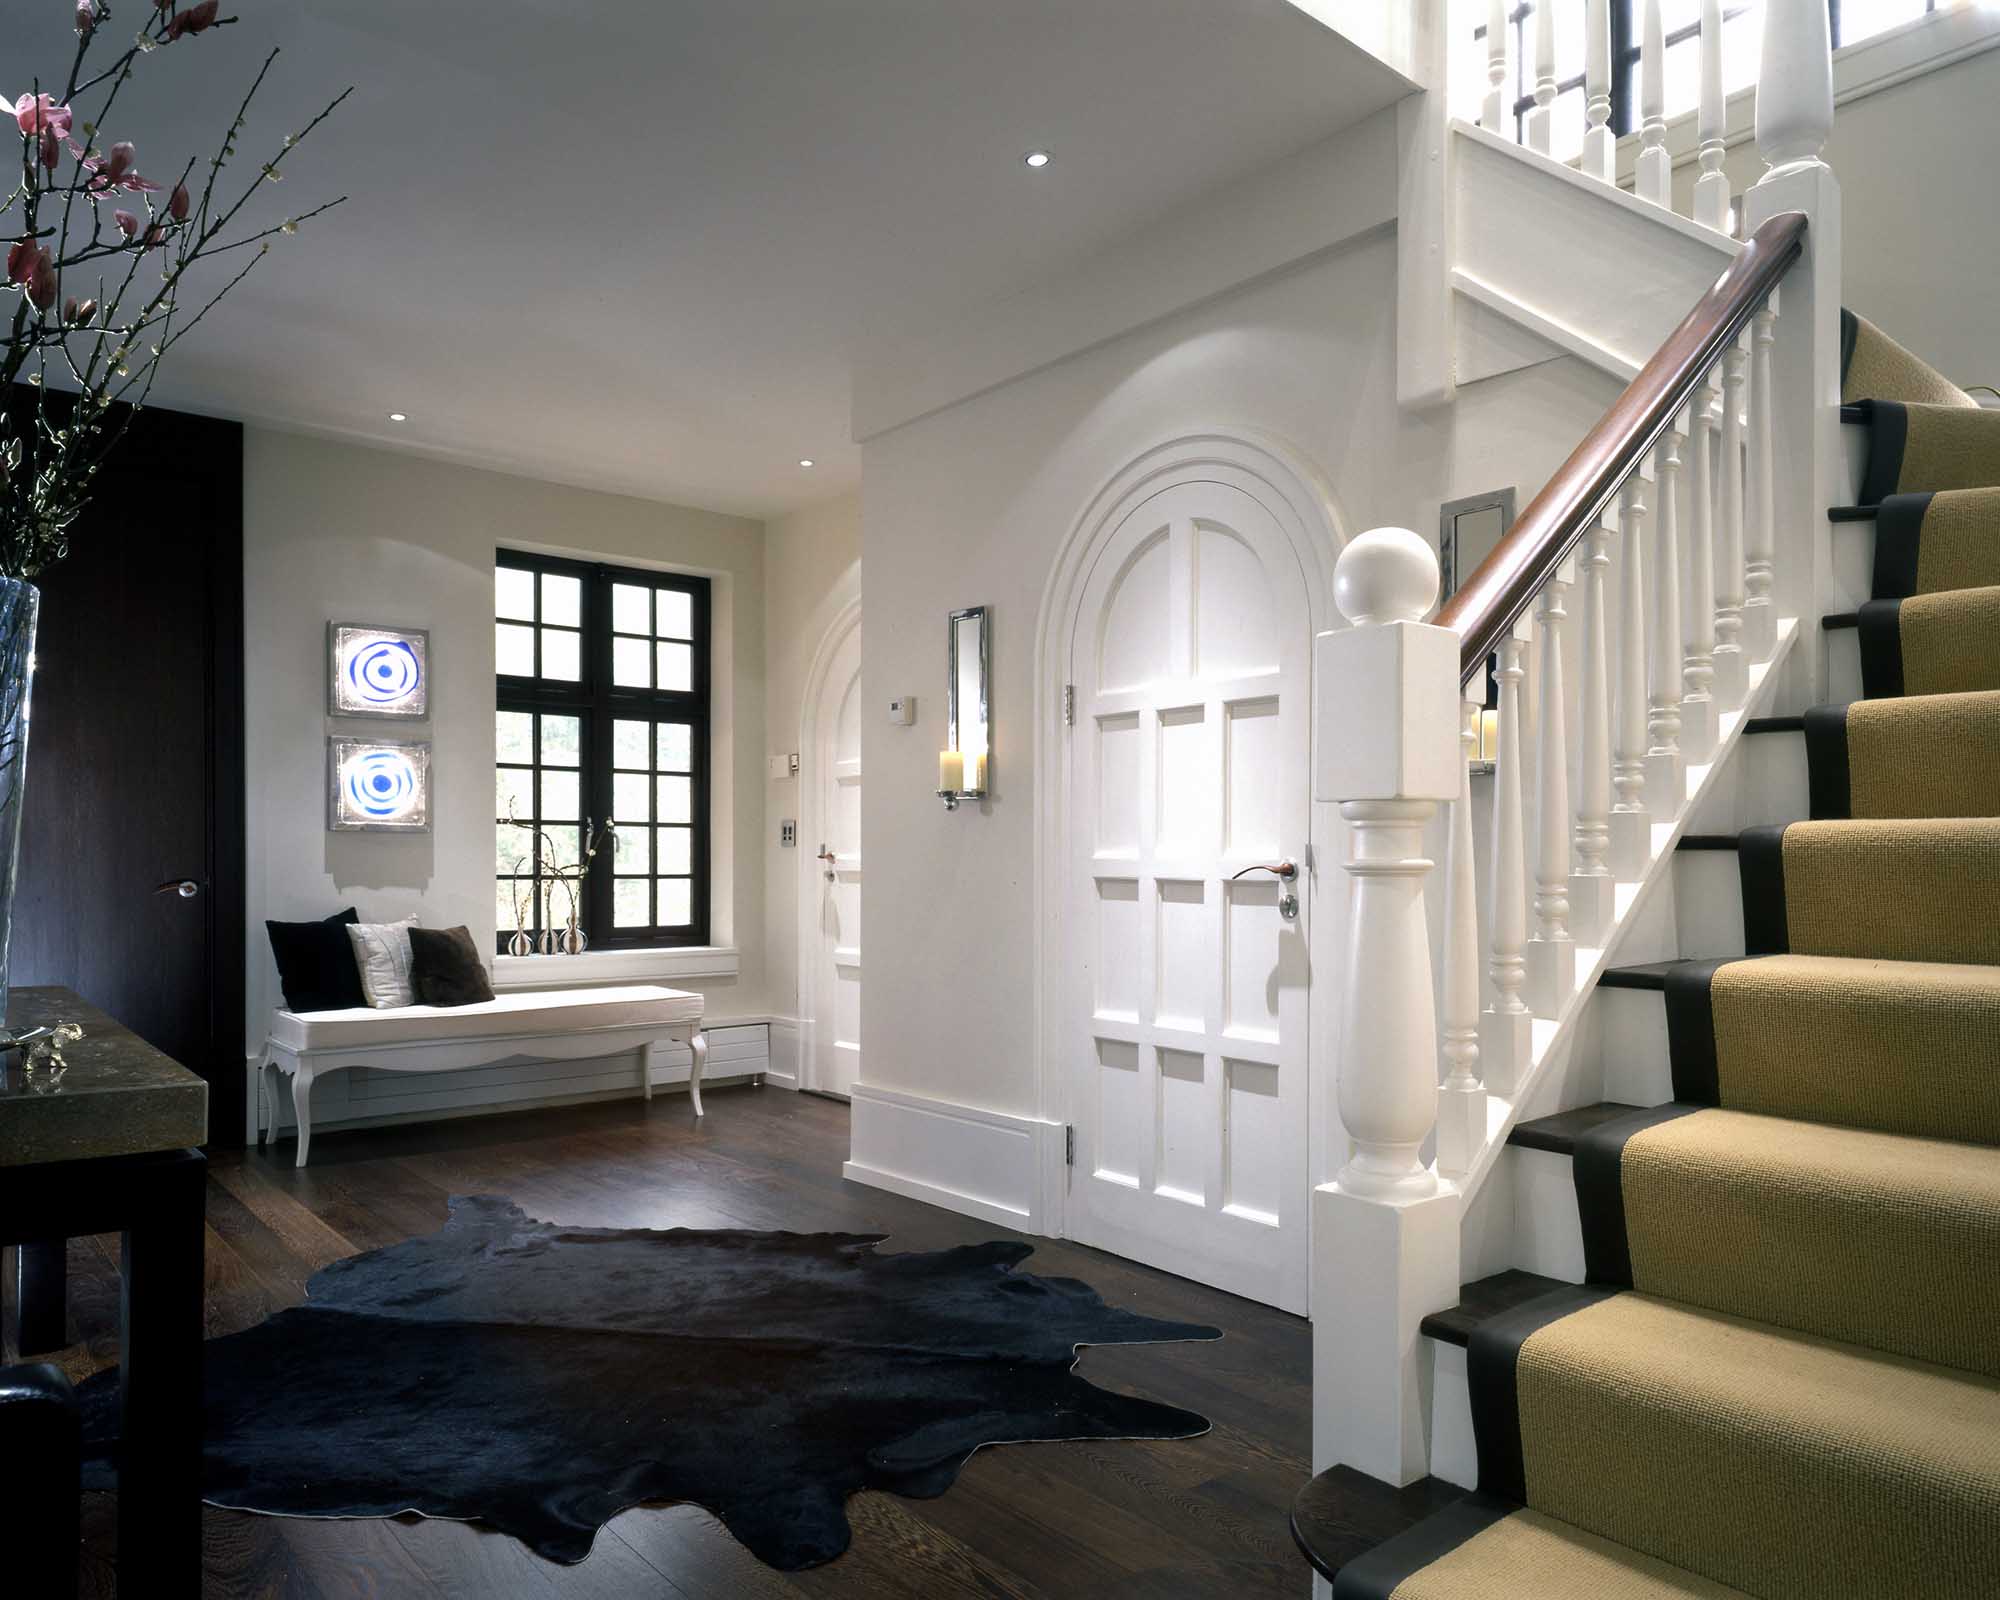 Contemporary, transitional entryway foyer with arched doorway, stairs, animal pelt rug.